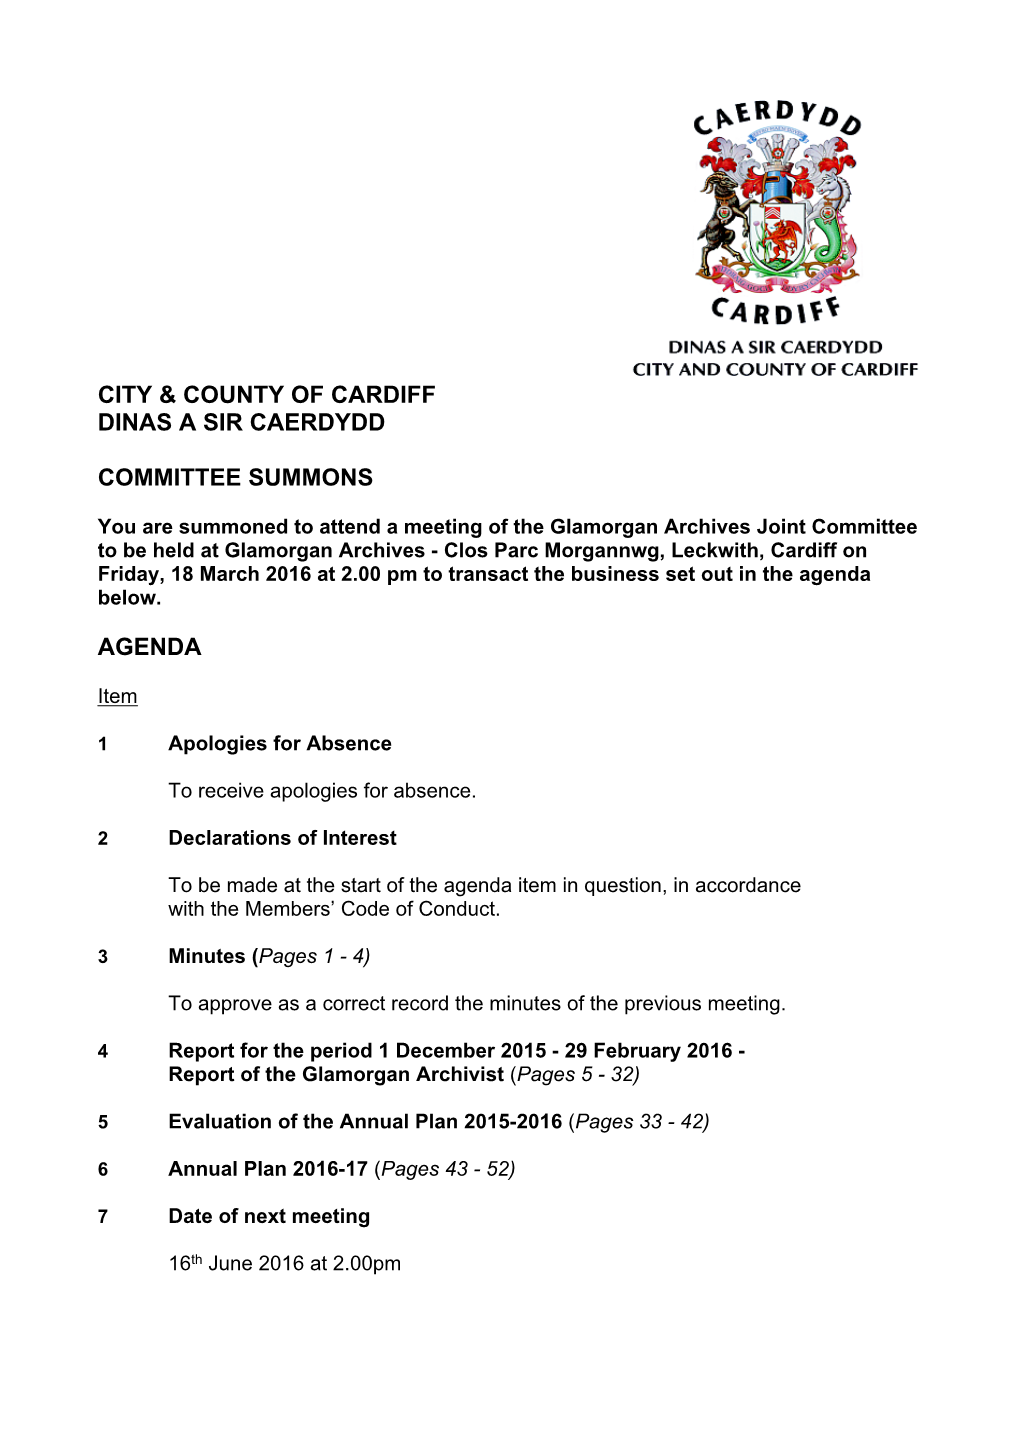 (Public Pack)Agenda Document for Glamorgan Archives Joint